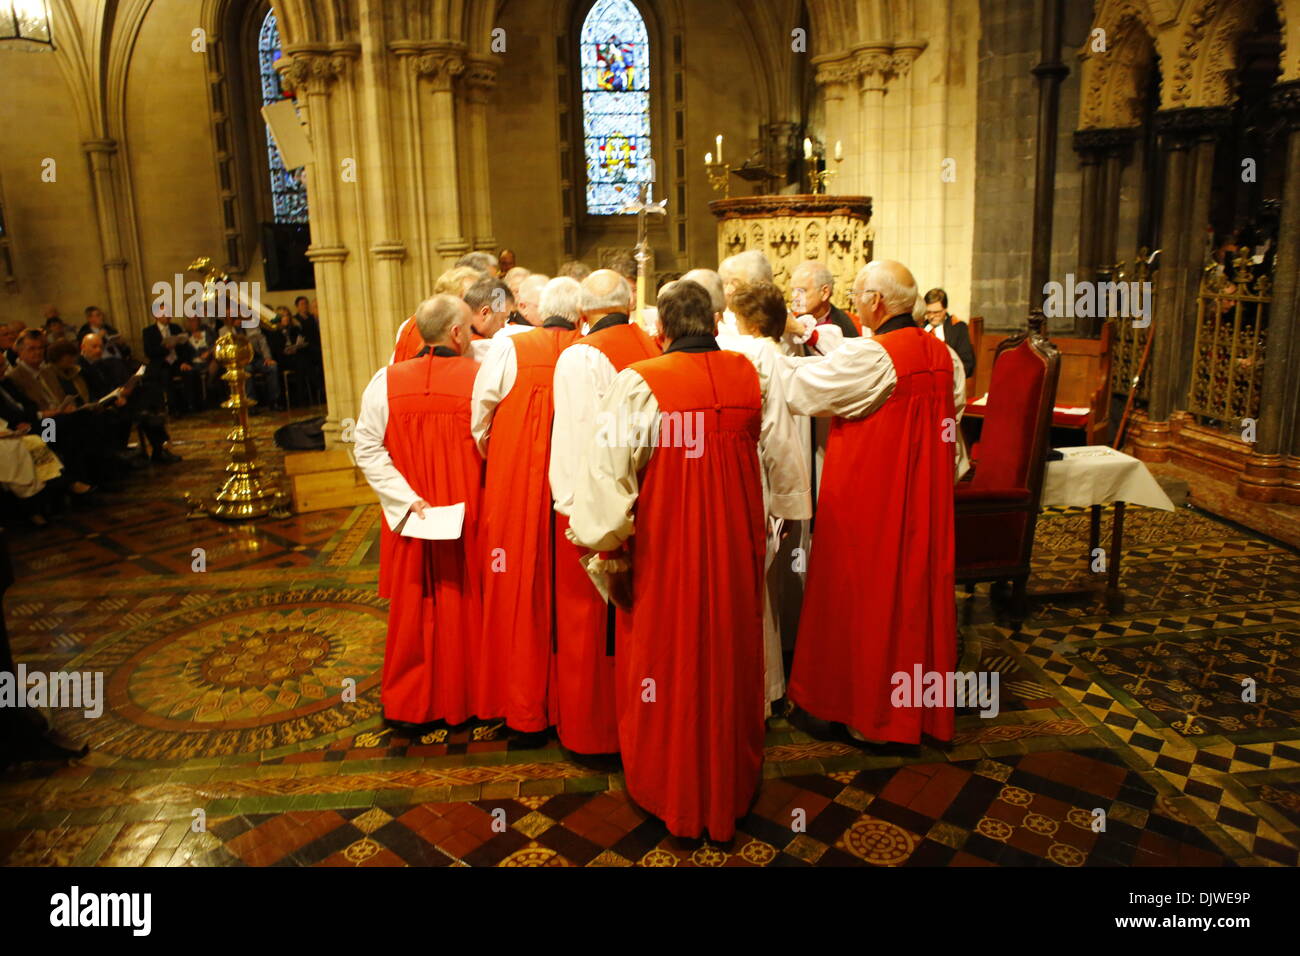 Dublin, Ireland. 30th November 2013. The attending bishops surround the bishop-elect the Revd Pat Storey and the consecrating Bishops, laying their hands on her to consecrate her. The Most Revd Pat Storey has been consecrated as Church of Ireland Bishop of Meath and Kildare in Dublin's Christ Church Cathedral. Credit:  Michael Debets/Alamy Live News Stock Photo